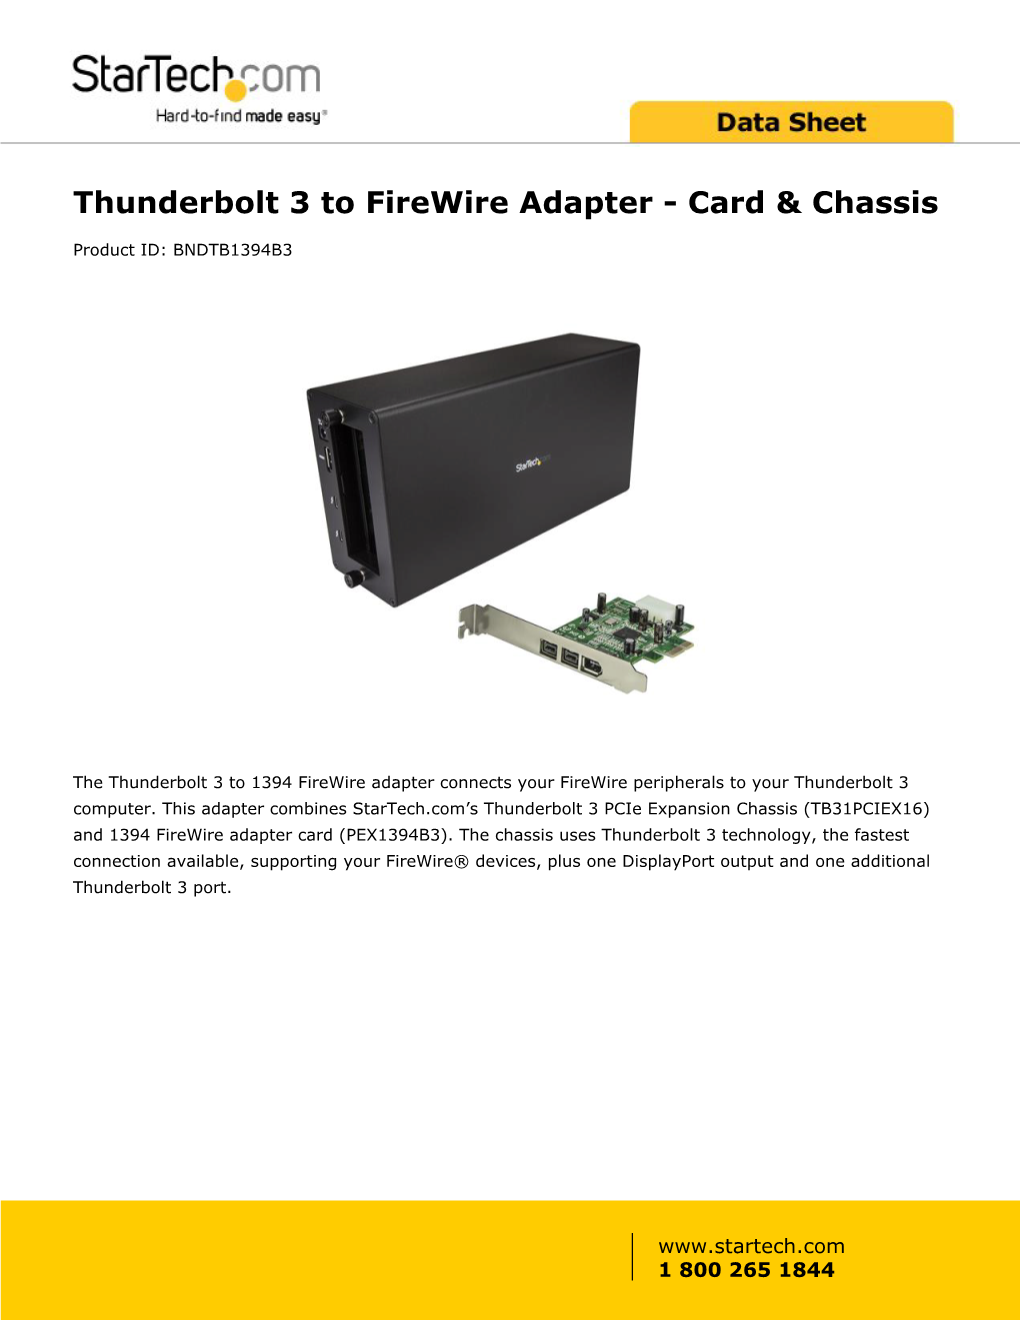 Thunderbolt 3 to Firewire Adapter - Card & Chassis